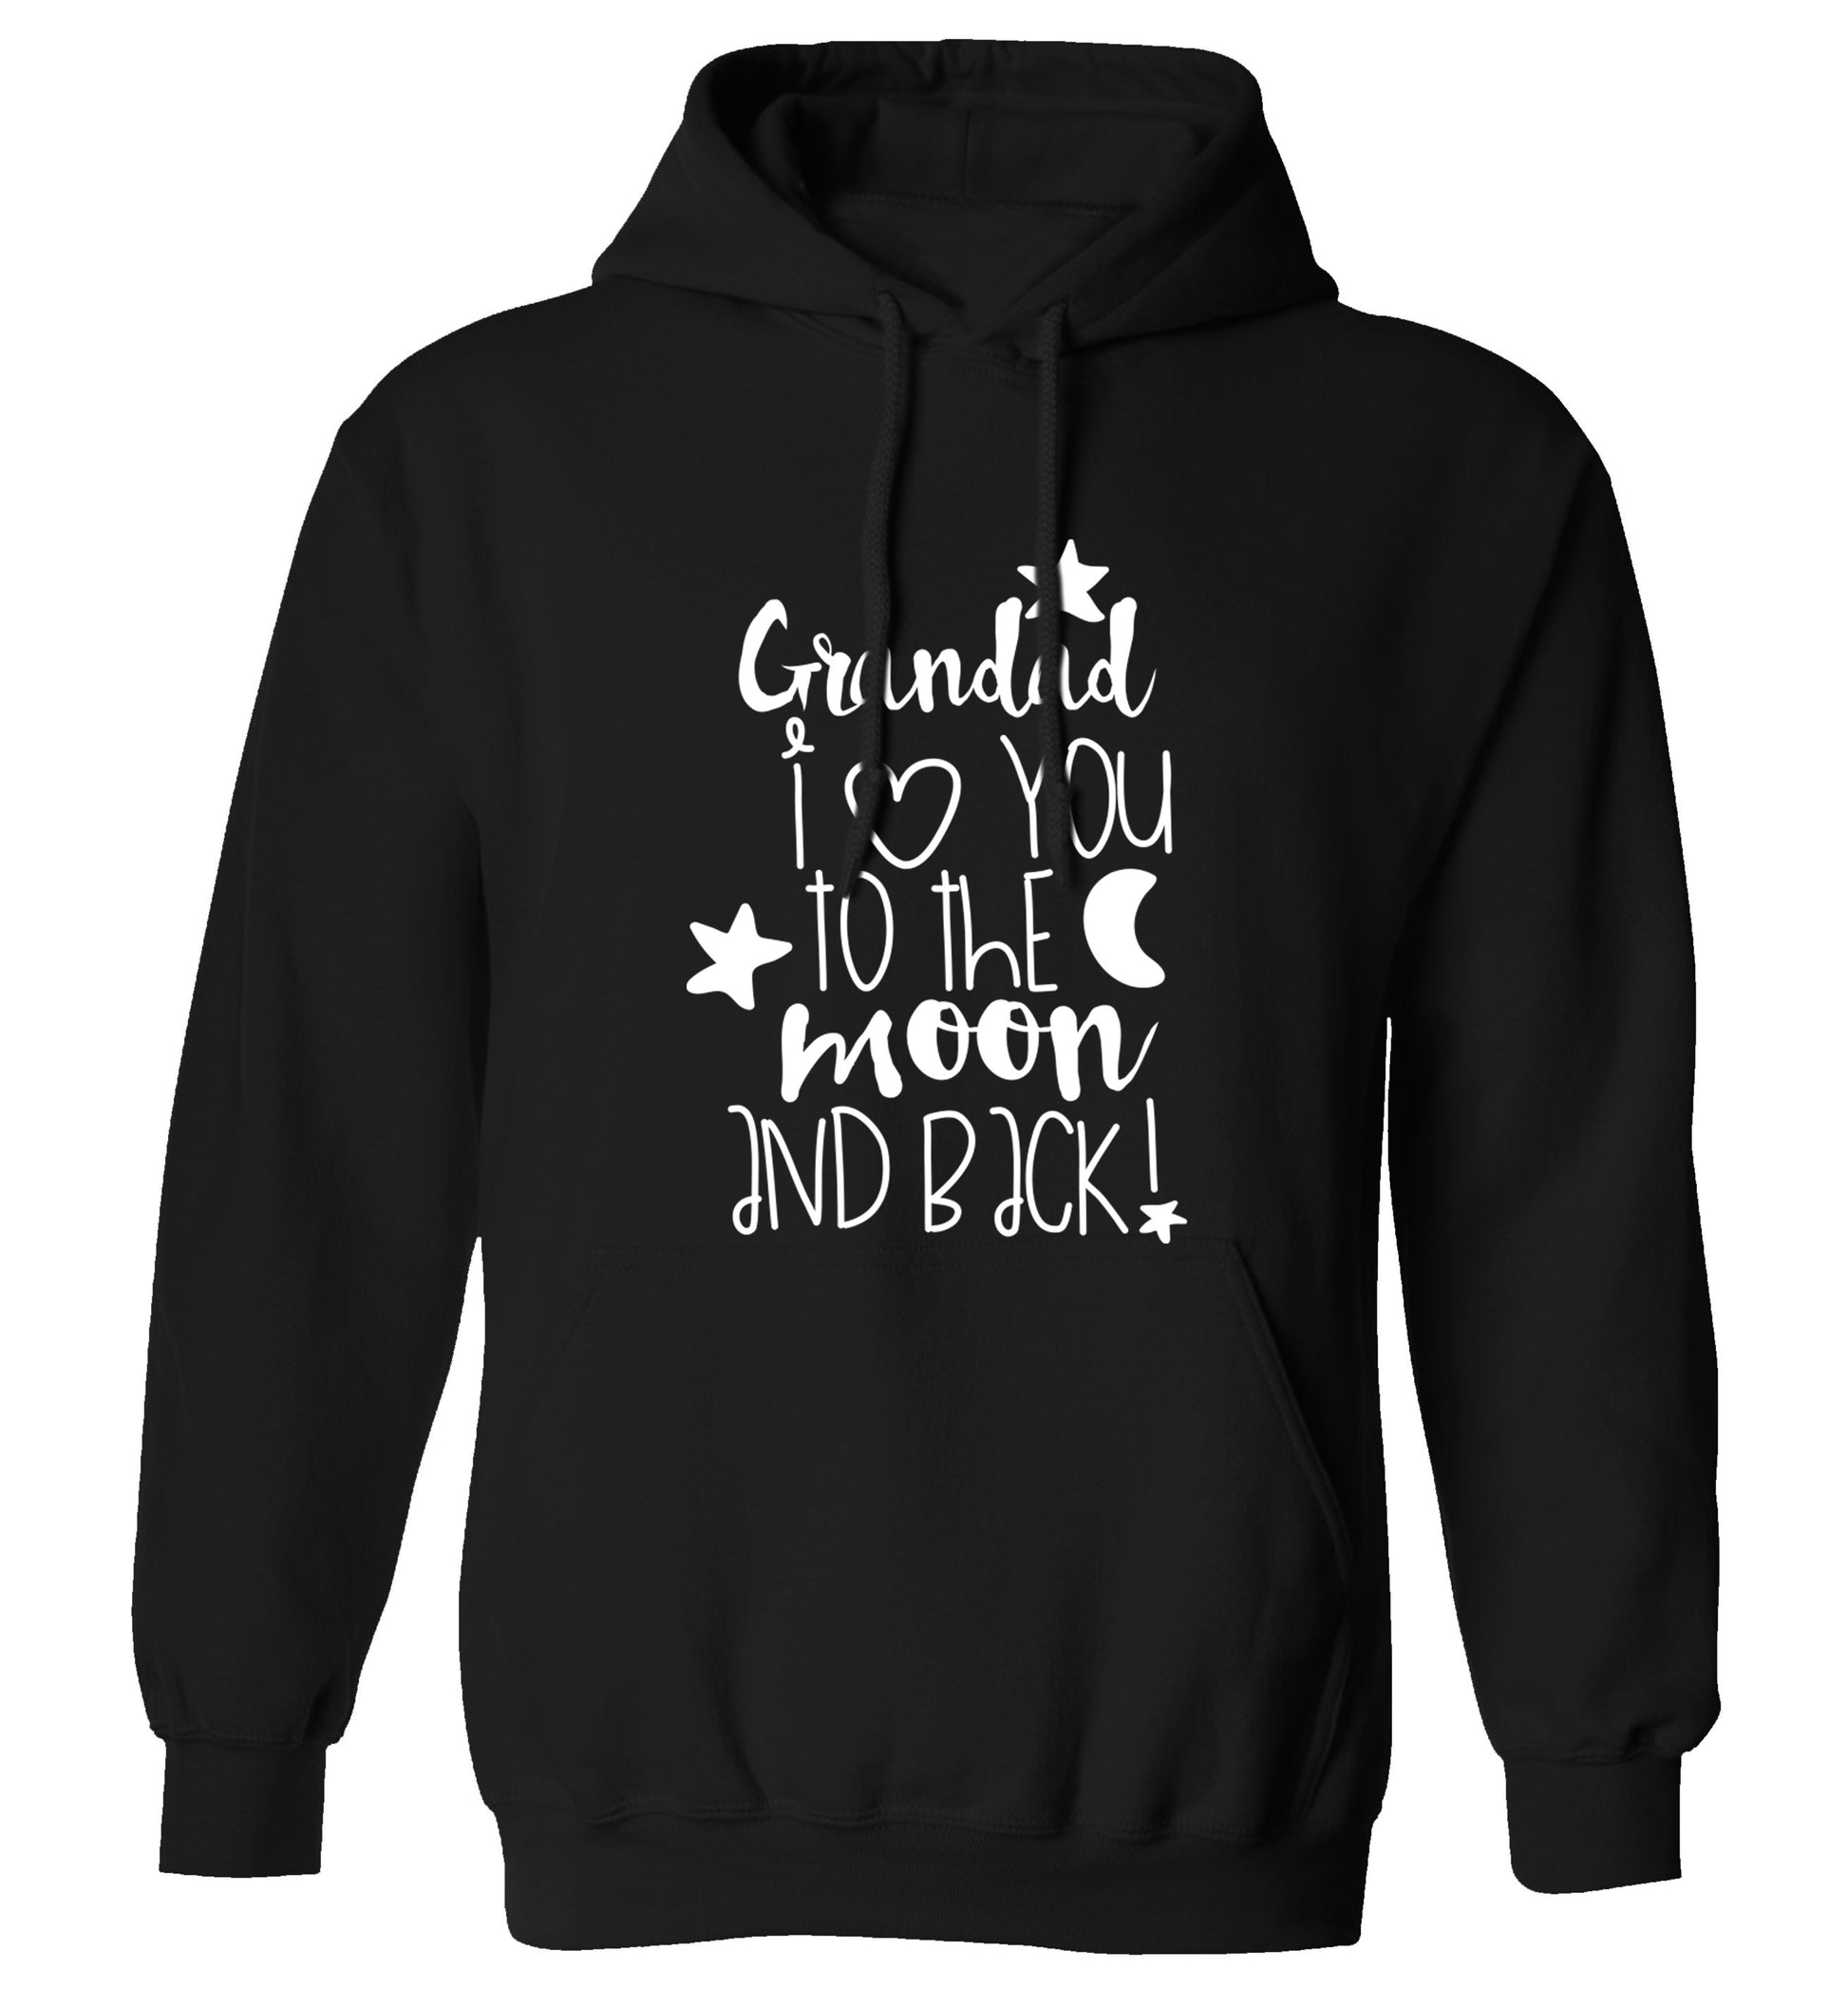 Grandad's I love you to the moon and back adults unisex black hoodie 2XL